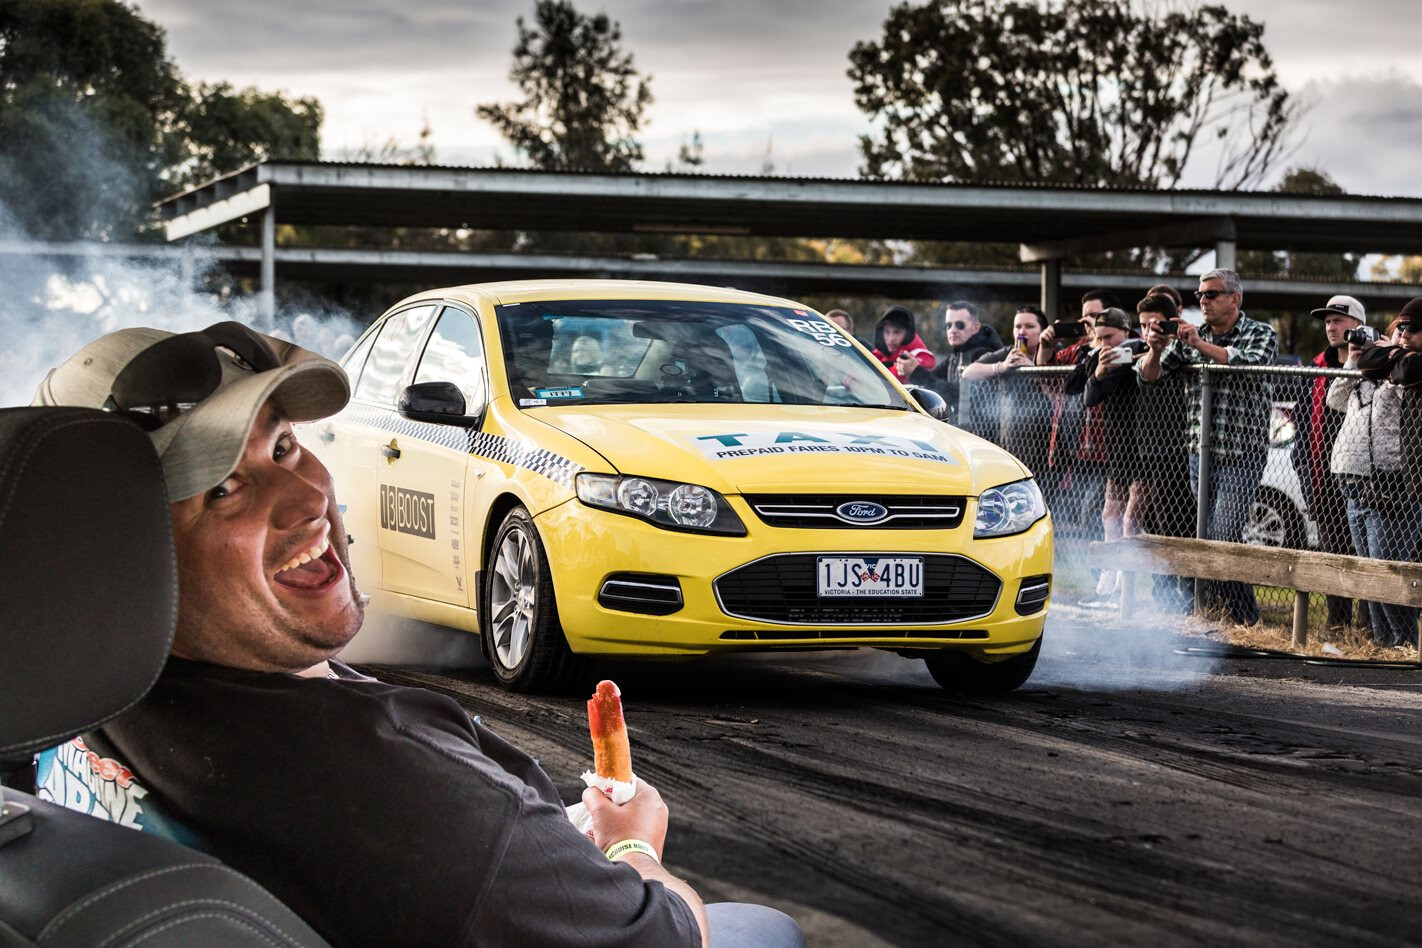 Carnage Plus Episode Eight – Bubba drives the Turbo Taxi